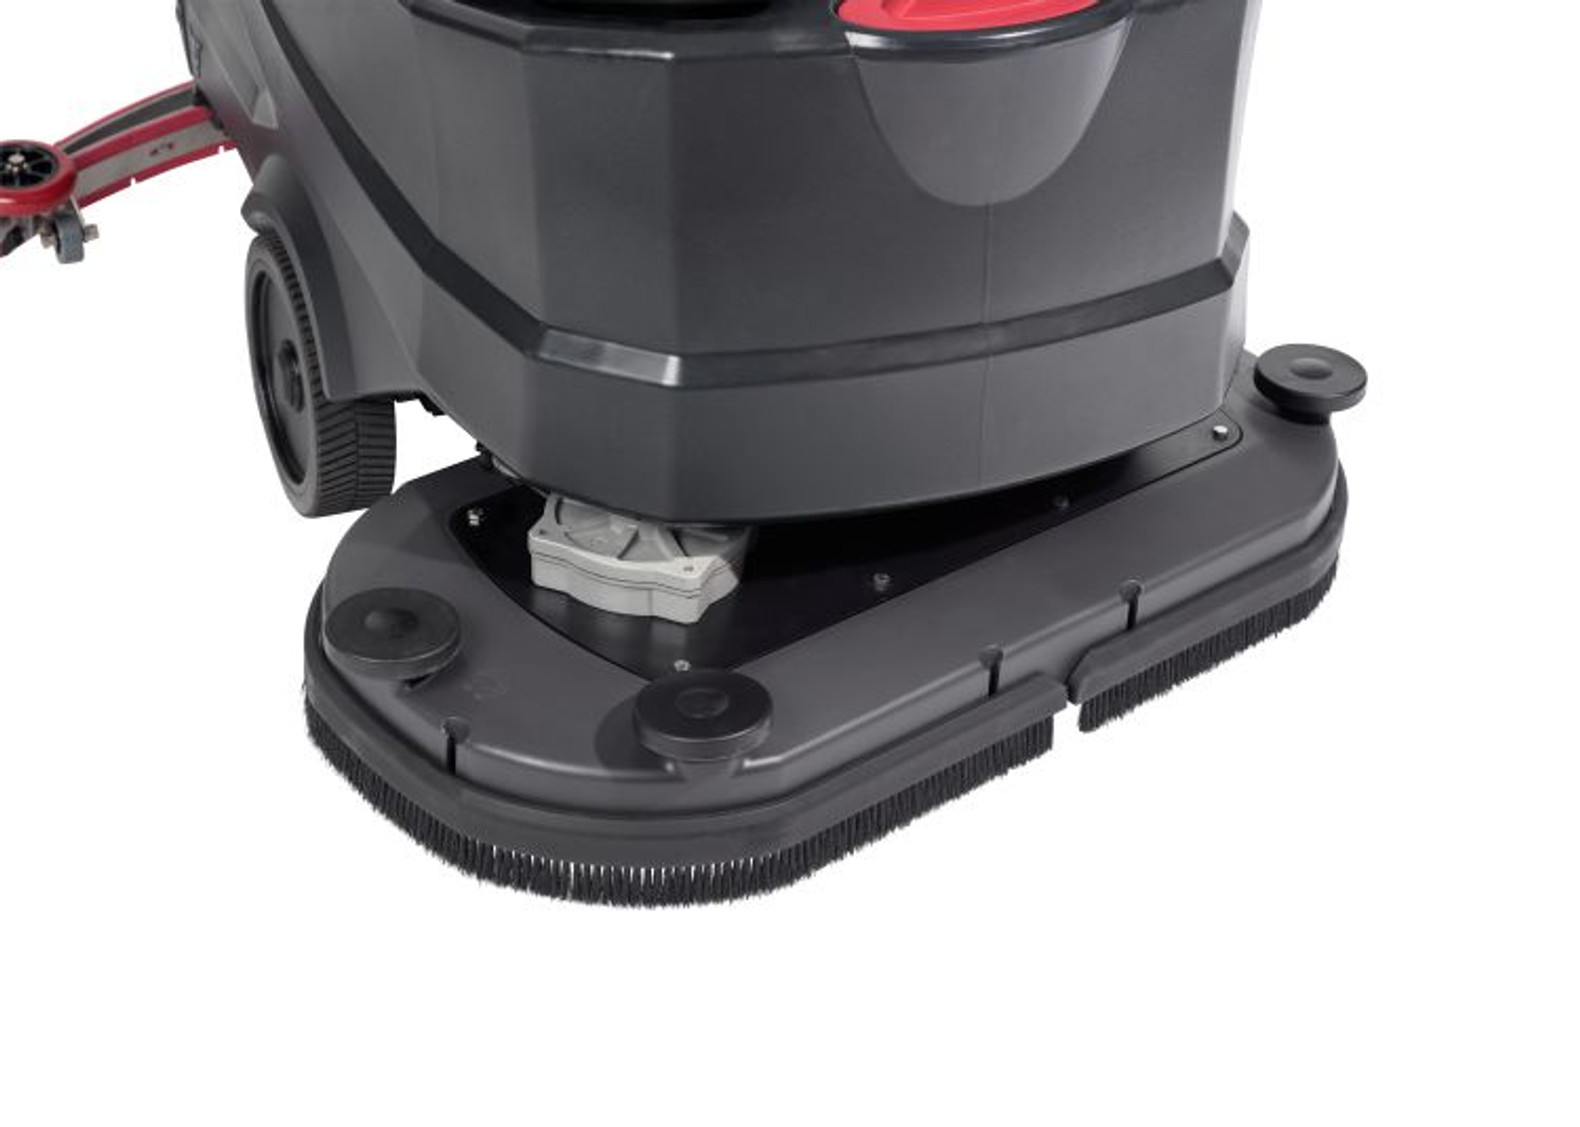 Viper As6690t Traction Drive 26 Battery Powered Floor Scrubber New